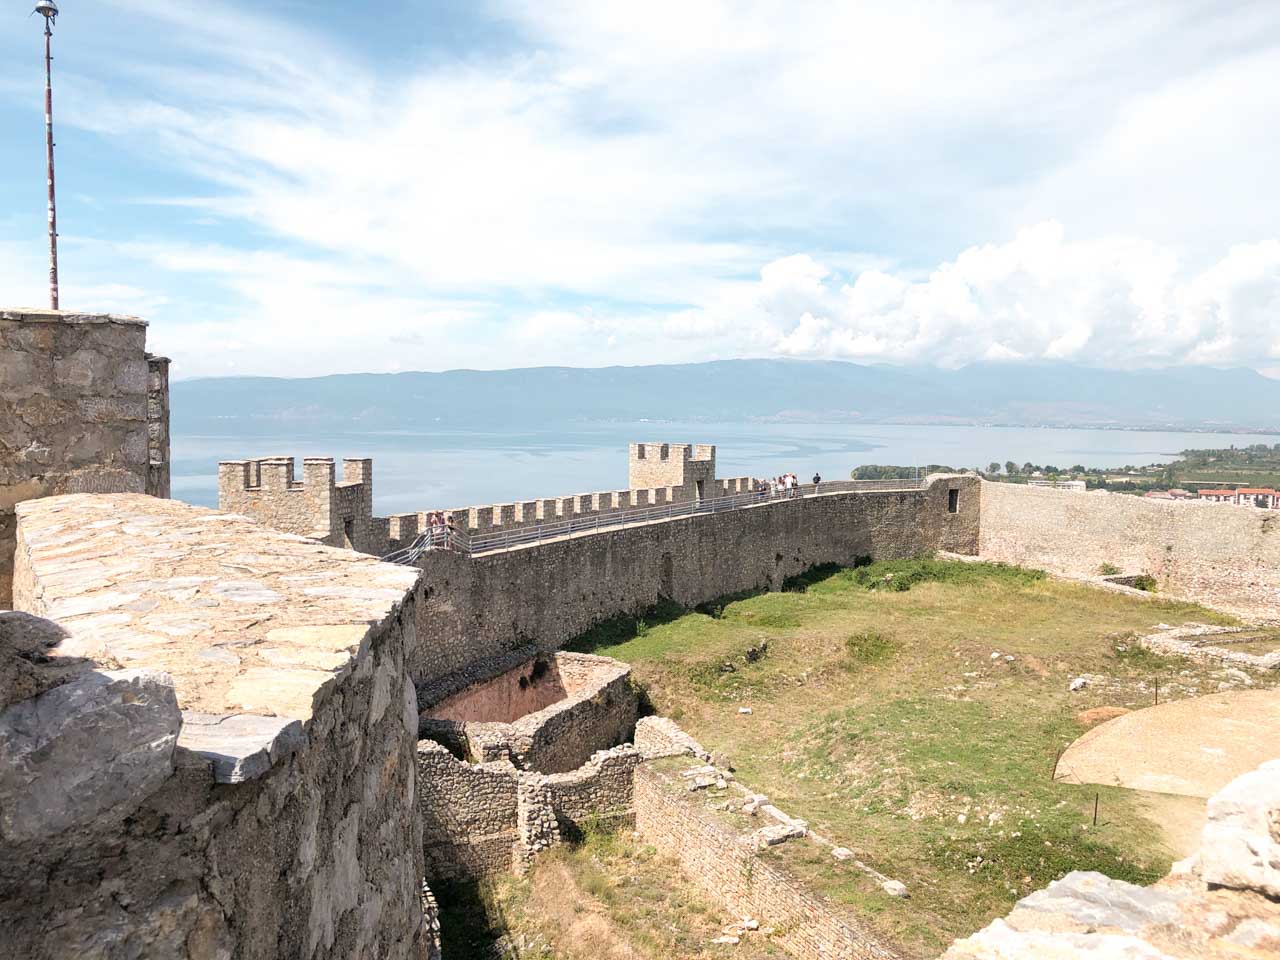 Samuel’s Fortress in Ohrid, North Macedonia seen from the top of its walls